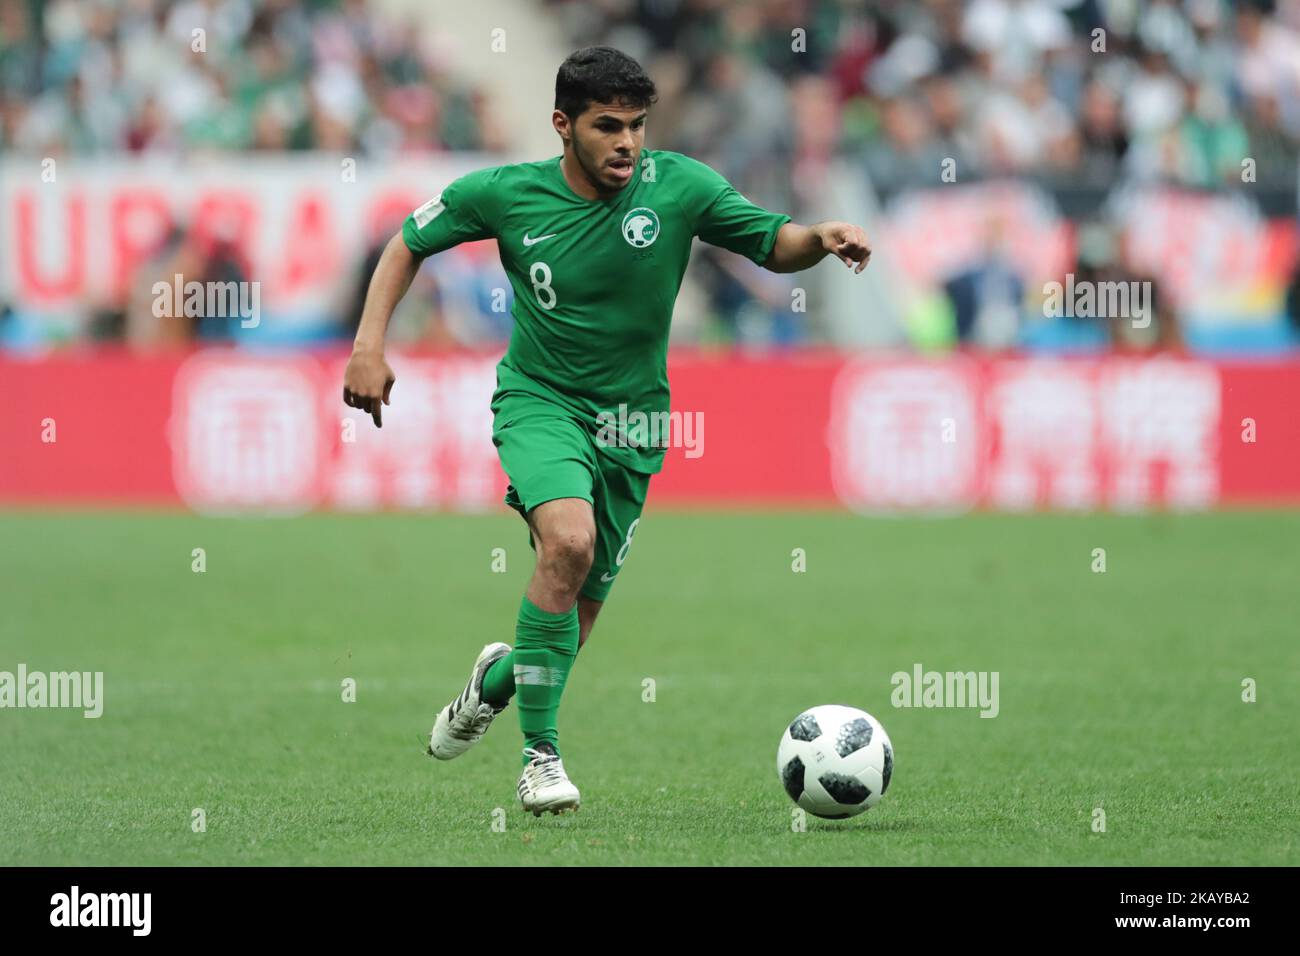 Midfielder Yahia Alshehri of Saudi Arabia National team during the Group A match between Russia and Saudi Arabia at the 2018 soccer World Cup at Luzhniki stadium in Moscow, Russia, Tuesday, June 14, 2018. (Photo by Anatolij Medved/NurPhoto) Stock Photo